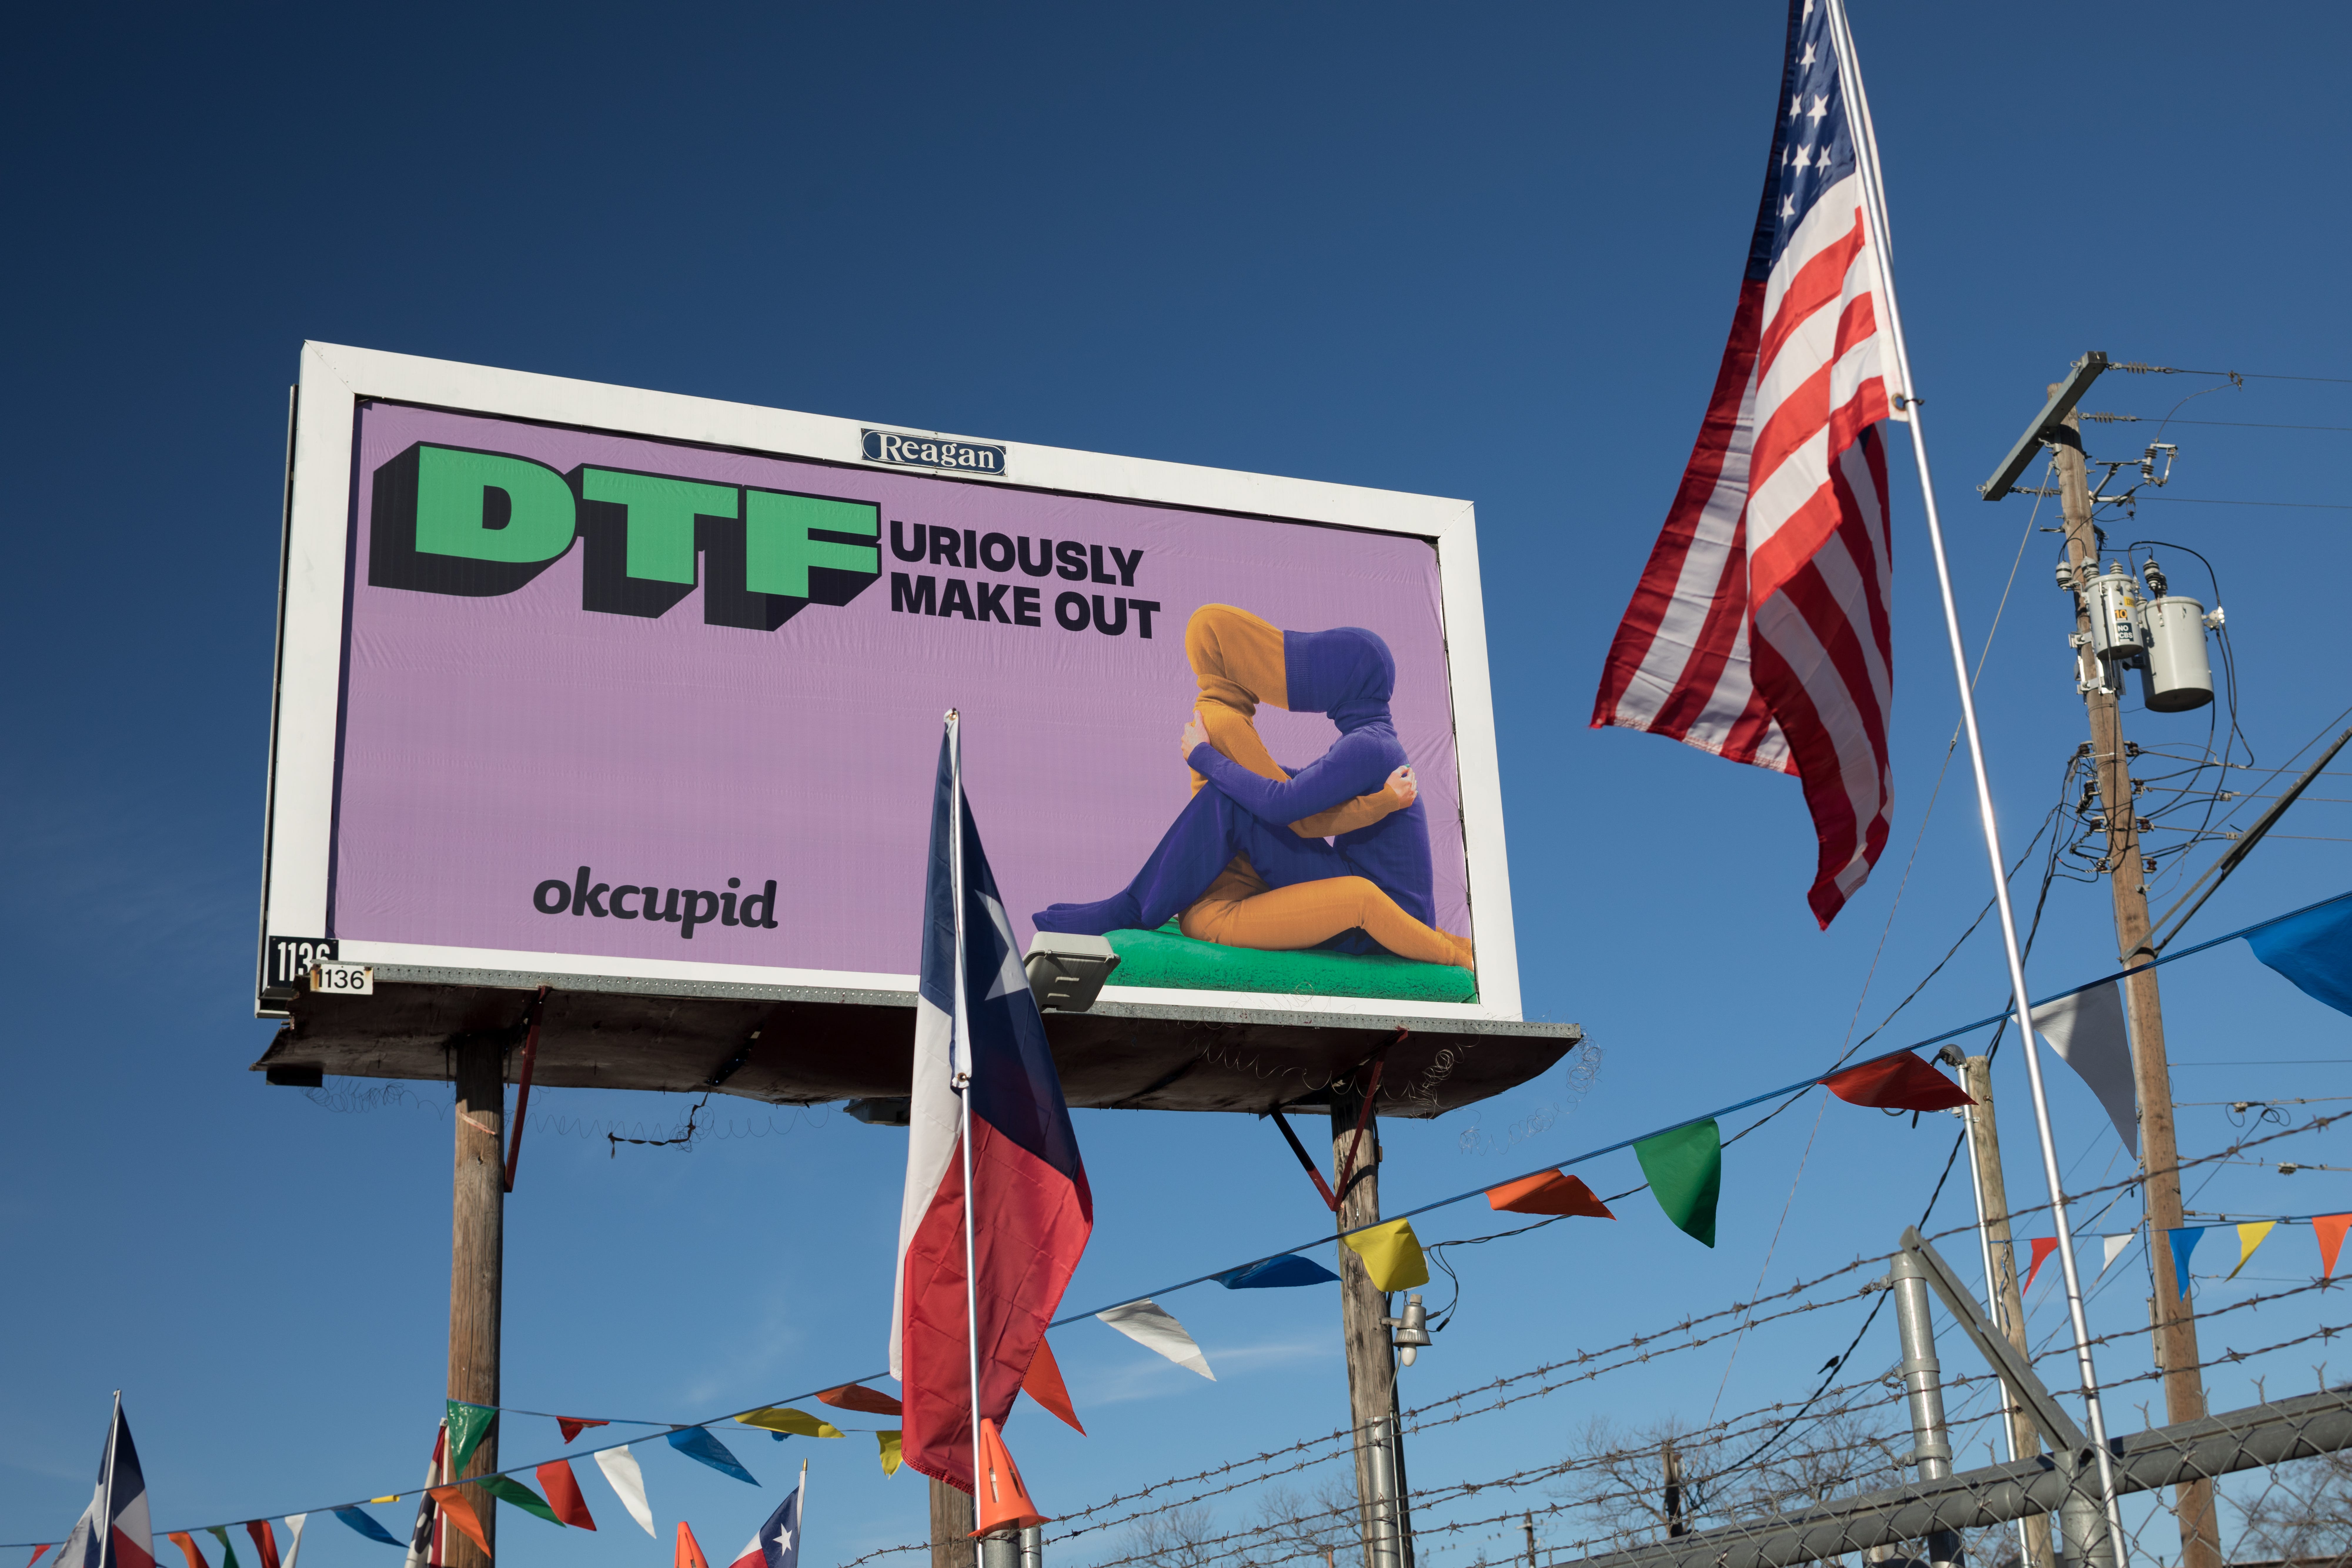 DTF' Meaning Redefined in OKCupid's Striking Ads